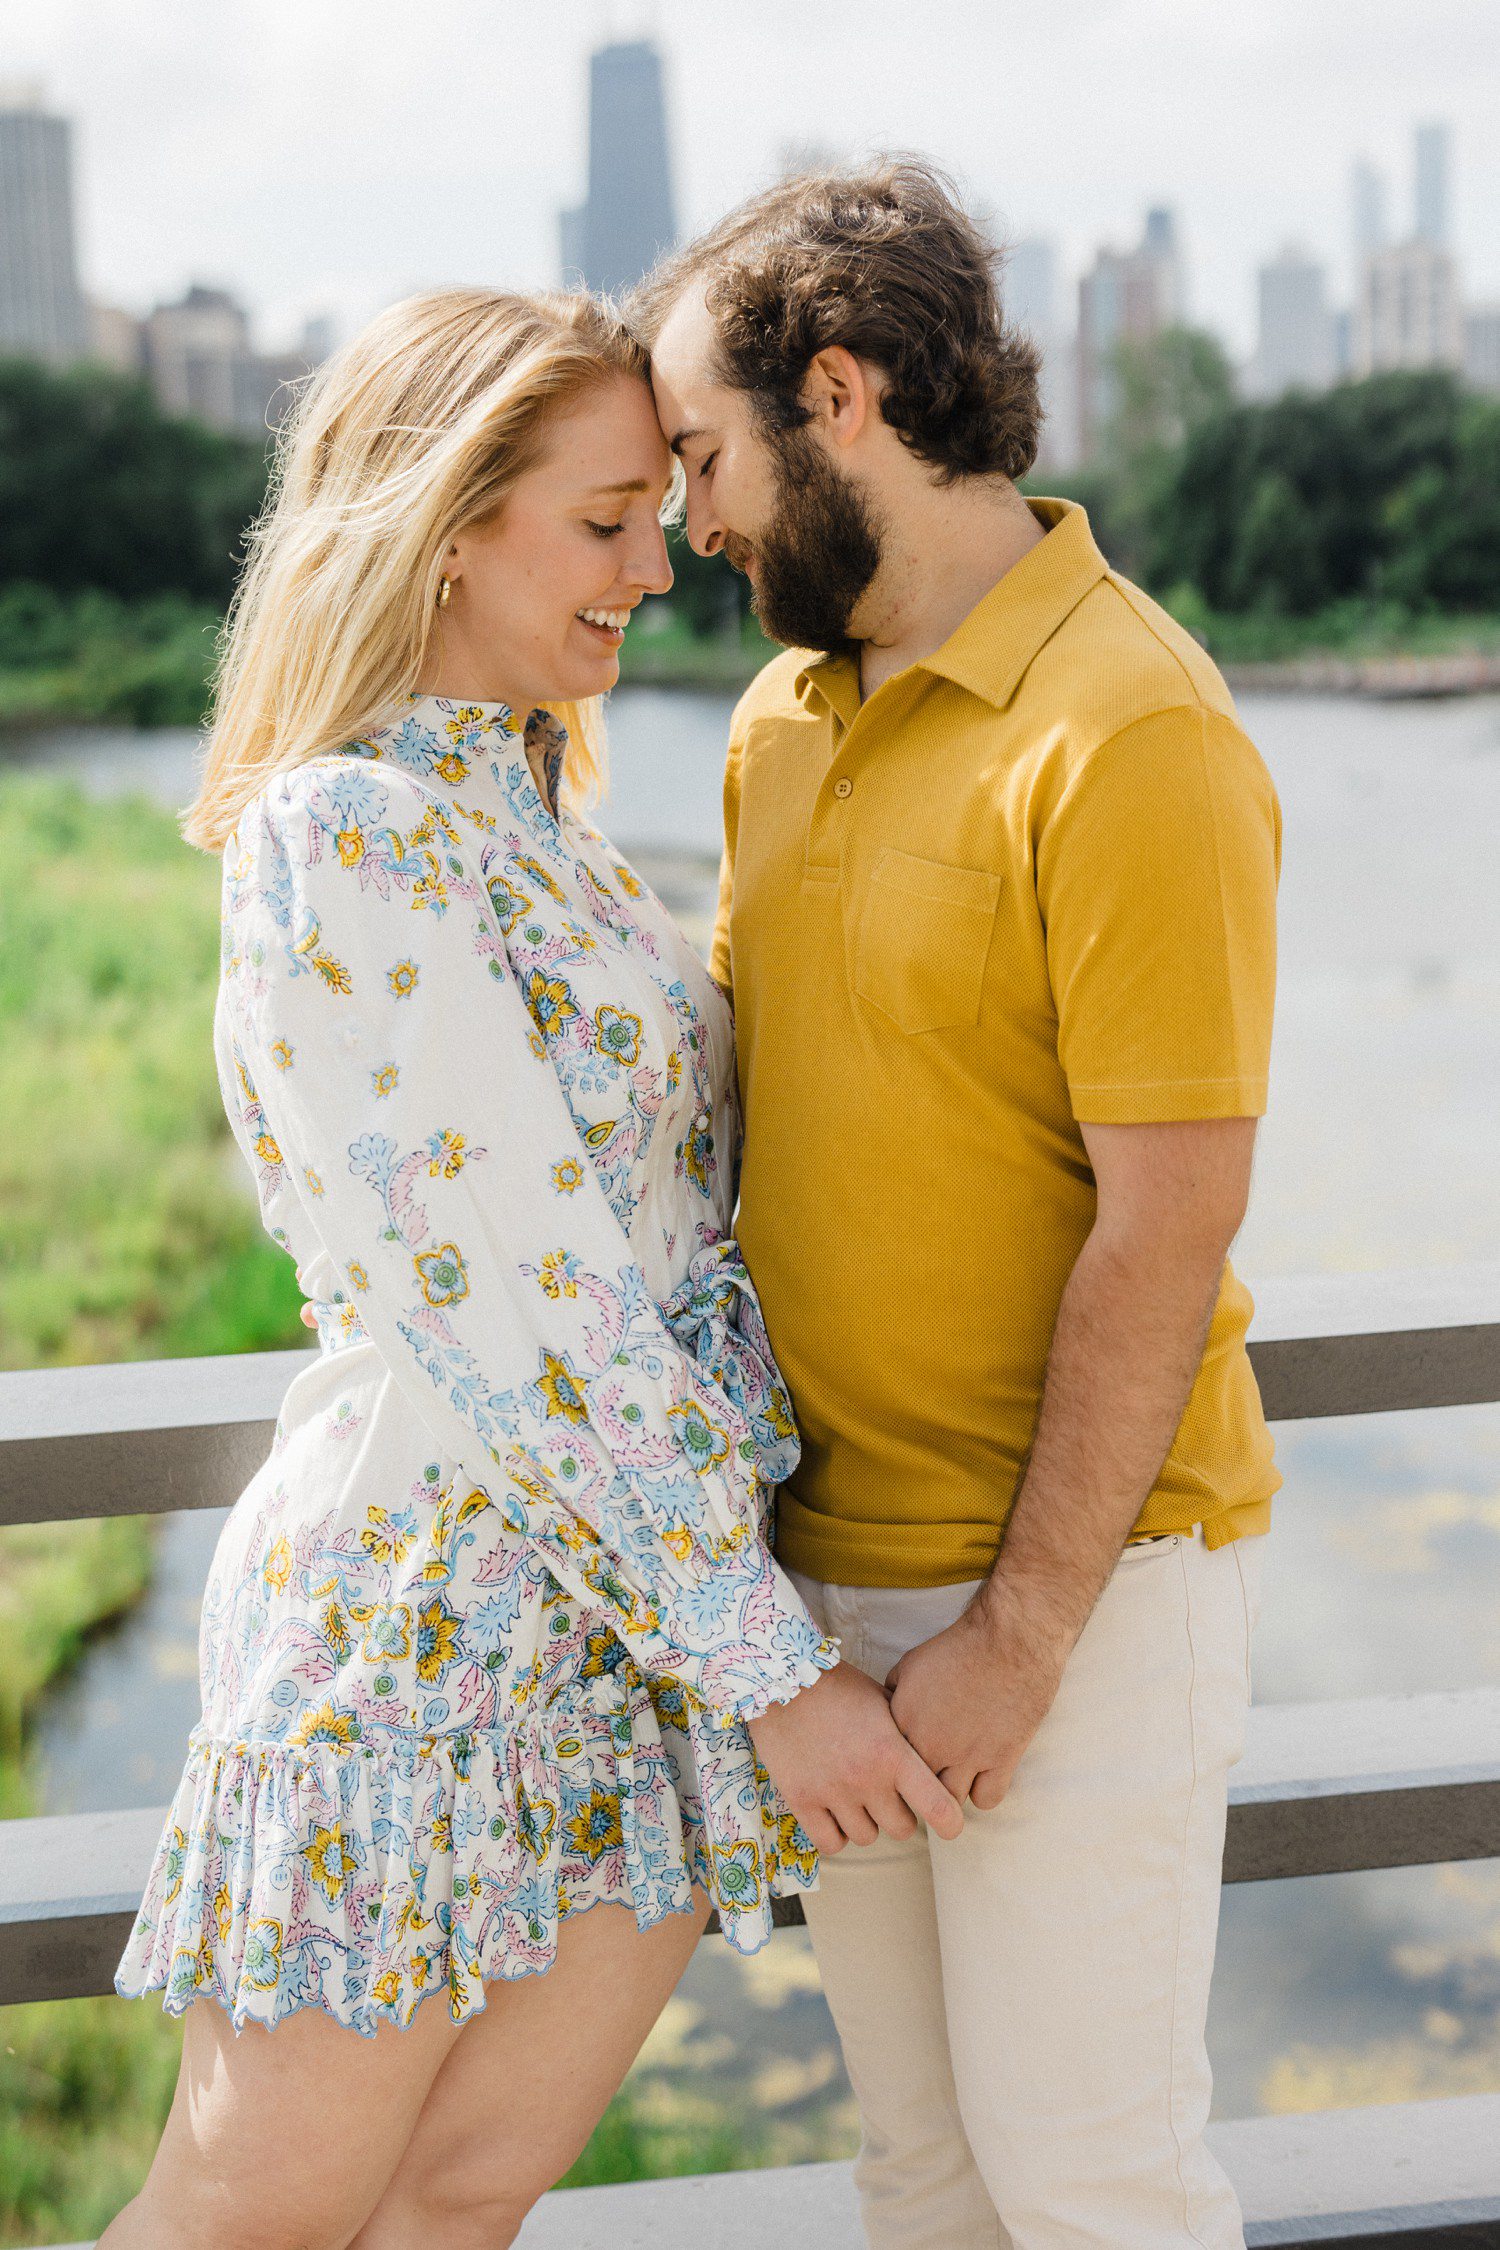 Couple forehead to forehead for engagement photos.